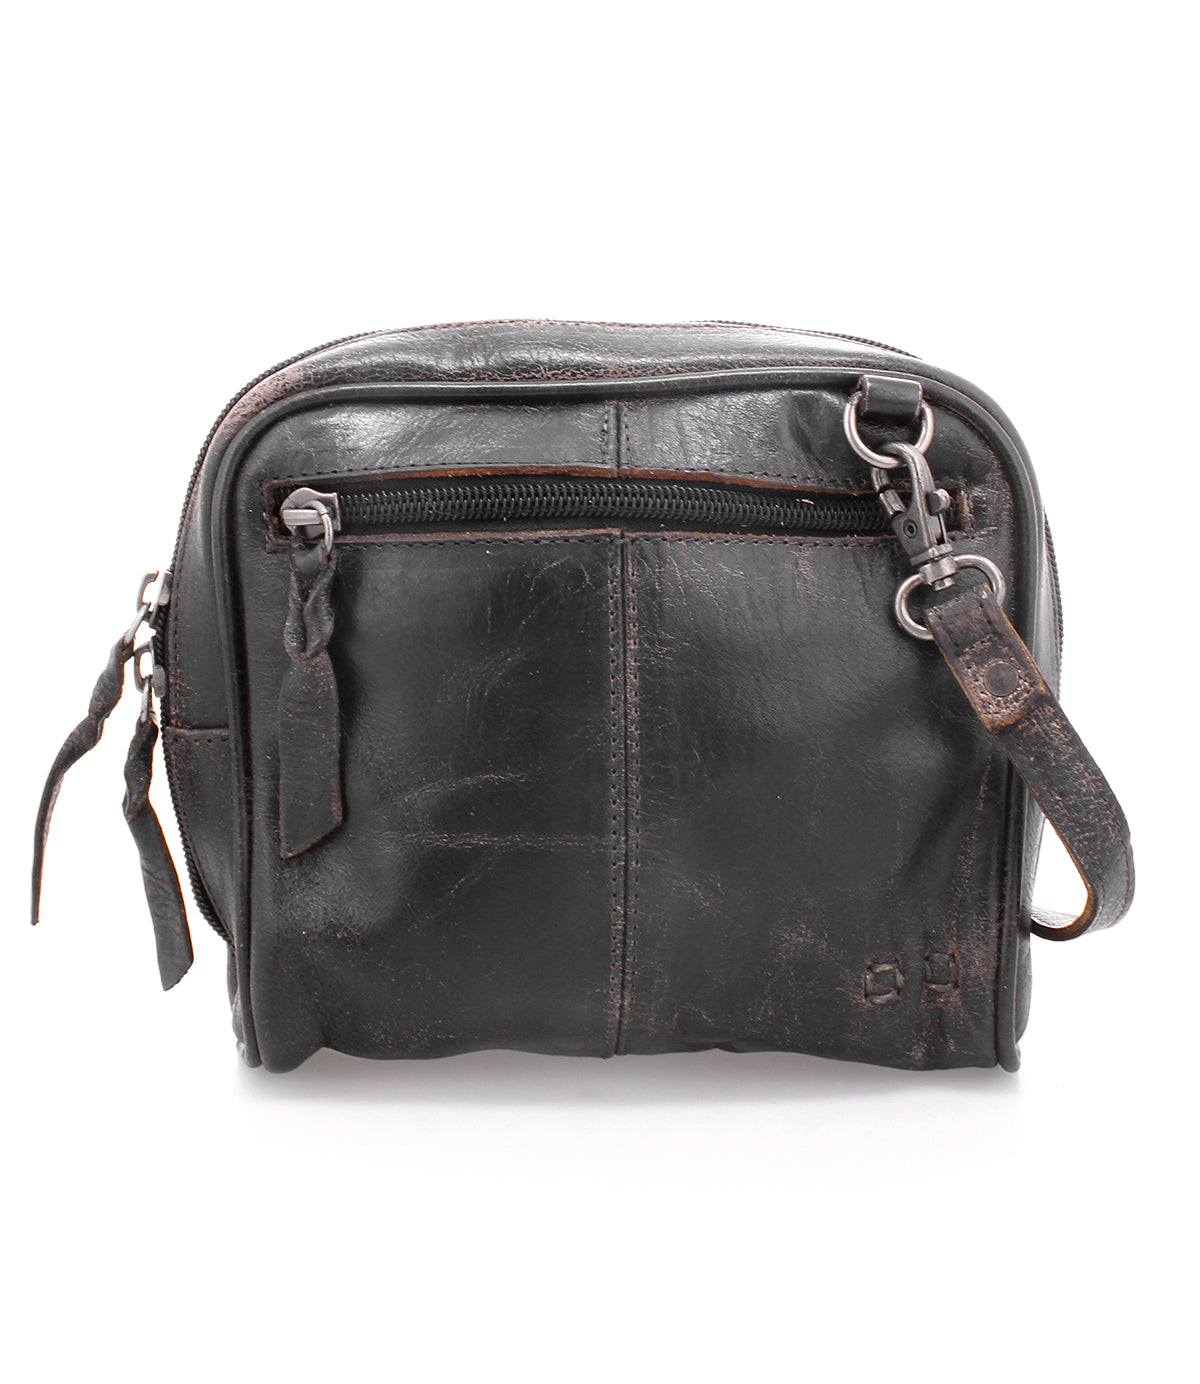 A sustainable Capture cross body bag with a zipper.